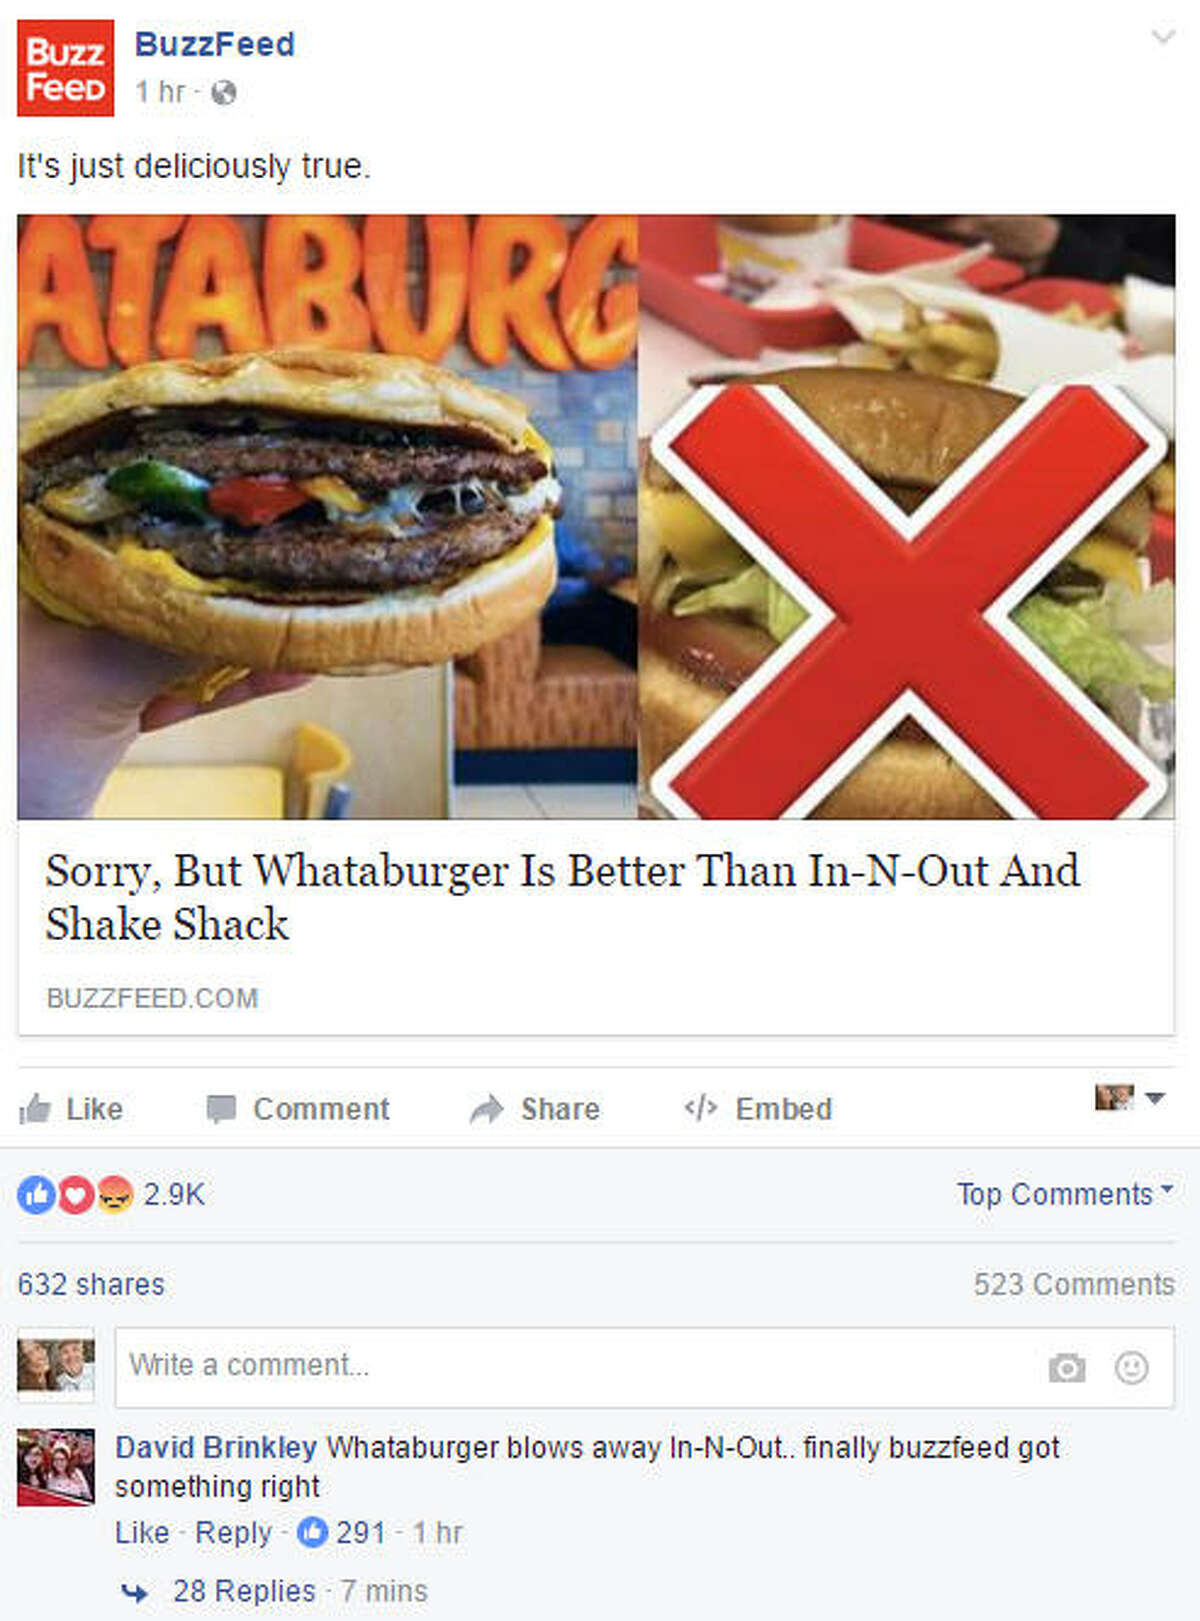 It's official. Whataburger has been dubbed the winner of taste over In-N-Out and Shake Shack, according to BuzzFeed. 